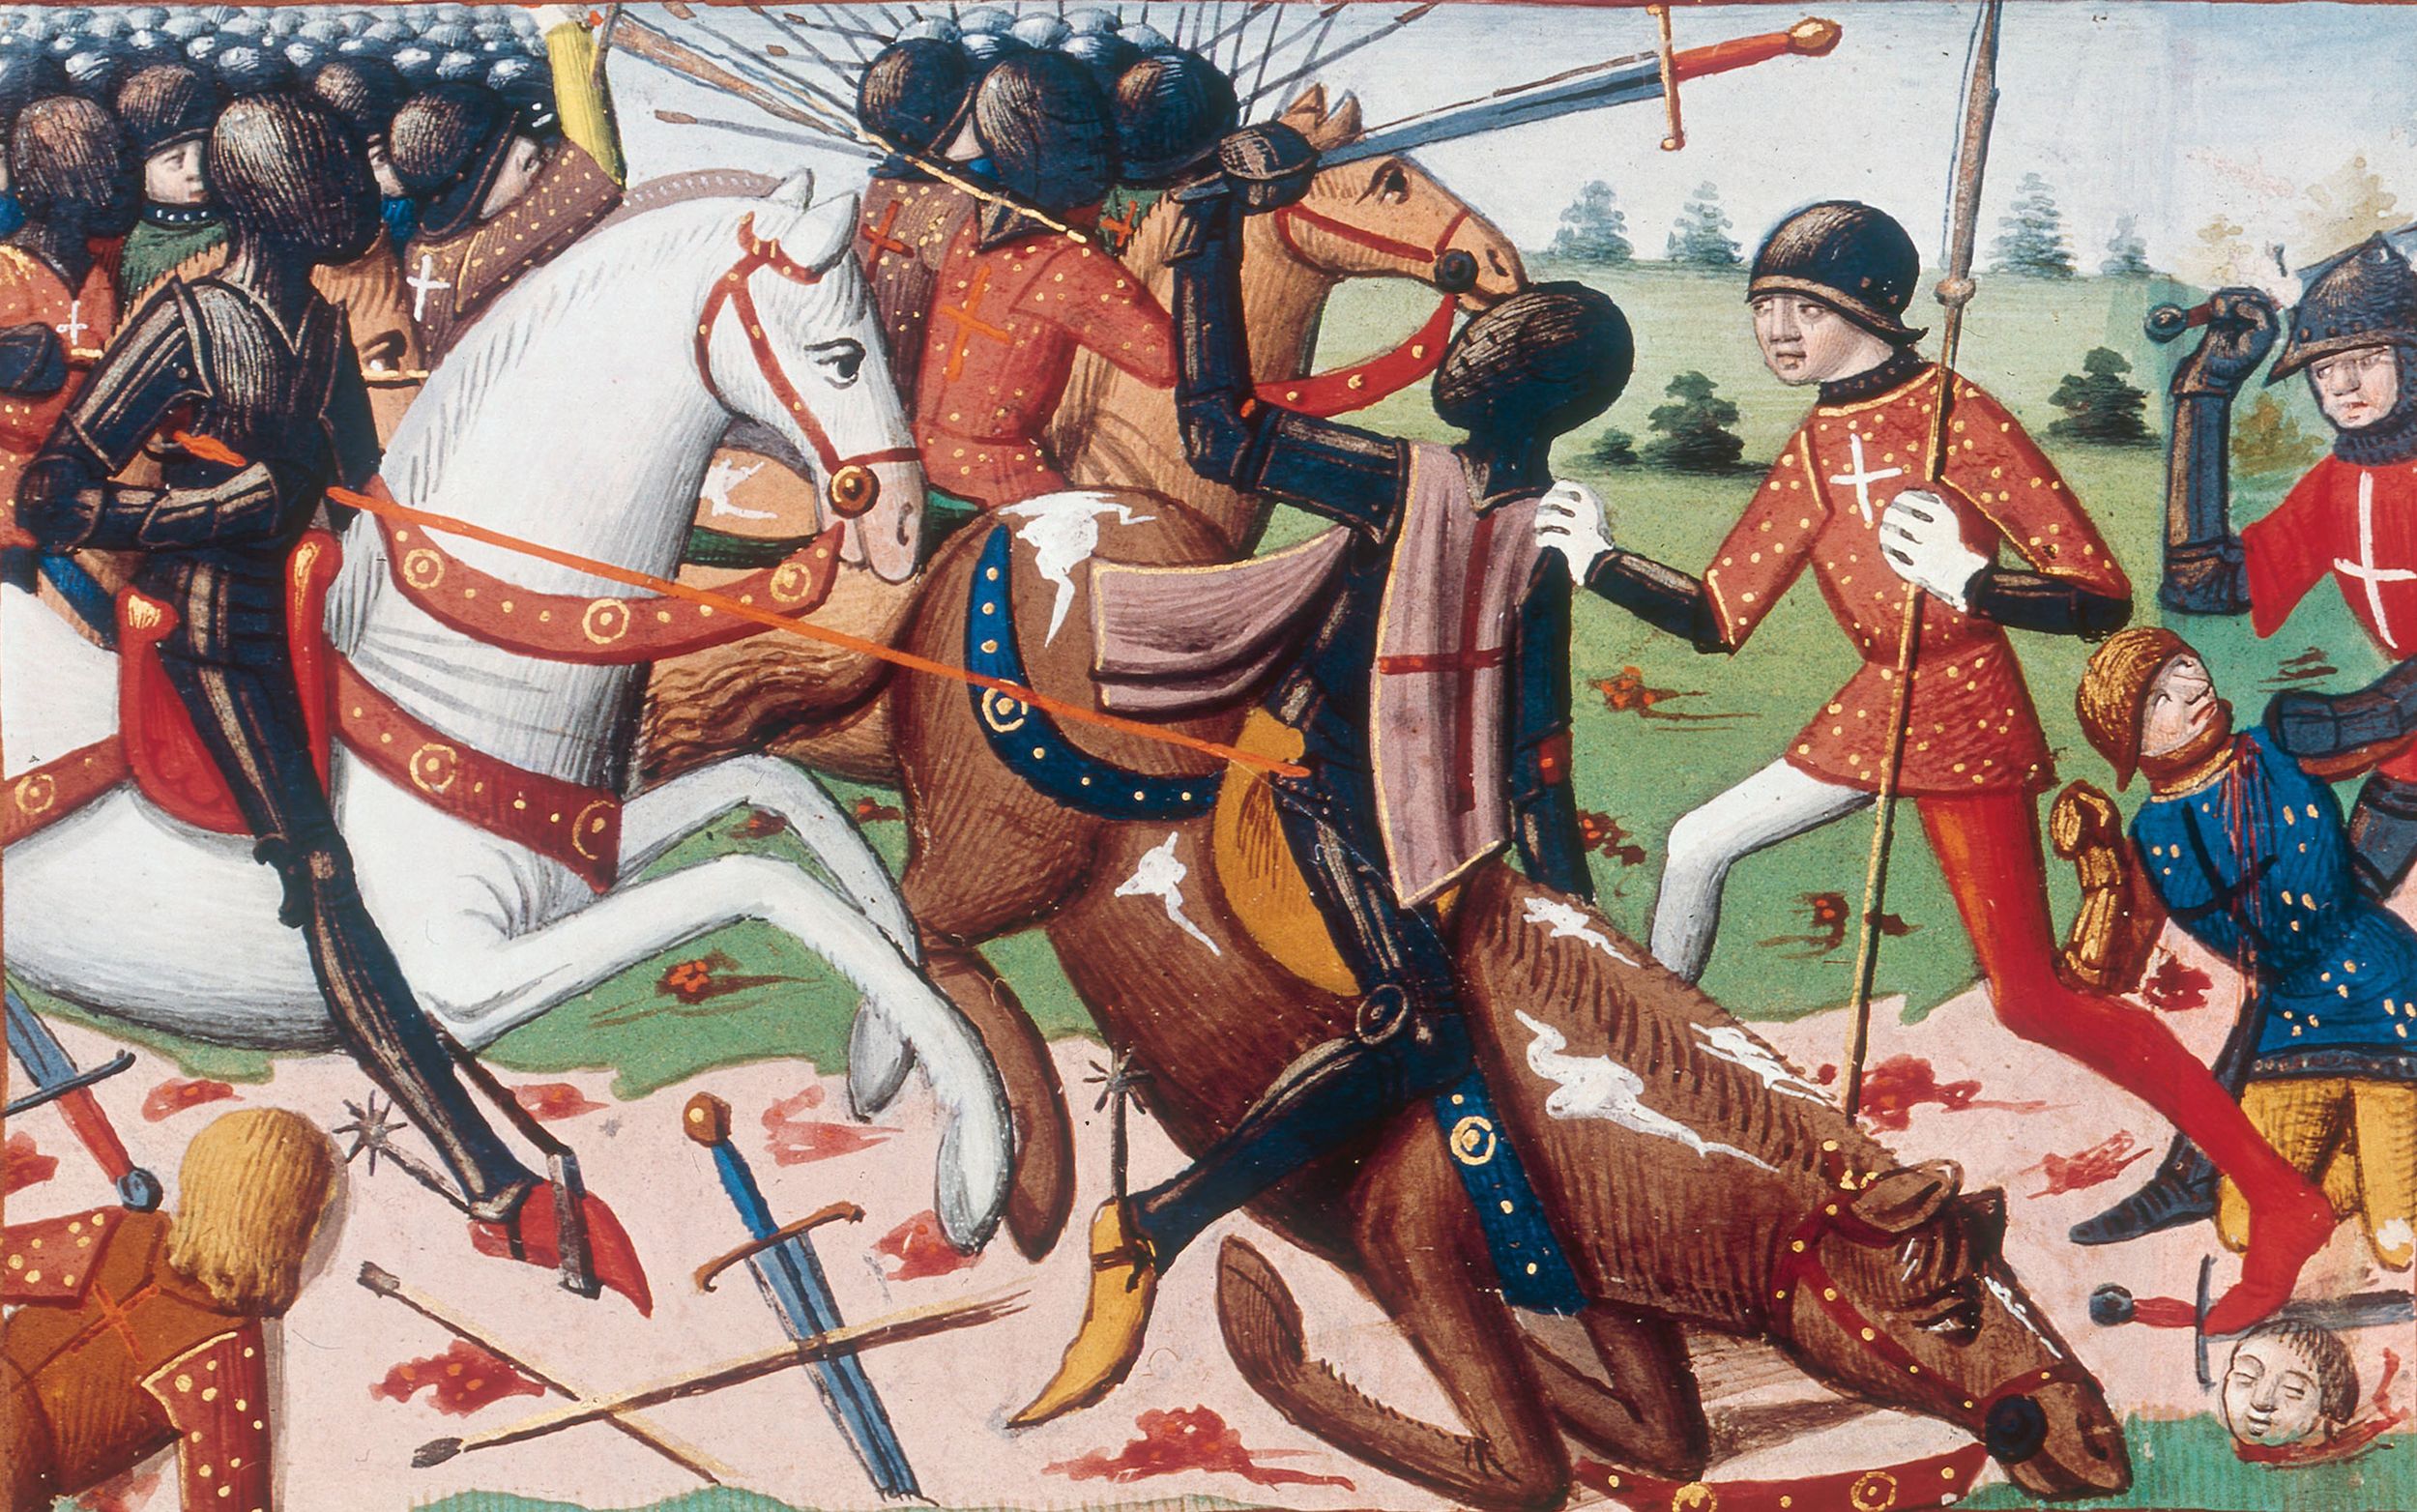 English Duke Talbot surrenders his sword to the Duke of Alençon. Talbot would later be ransomed, only to die at the Battle of Castillon in 1453.